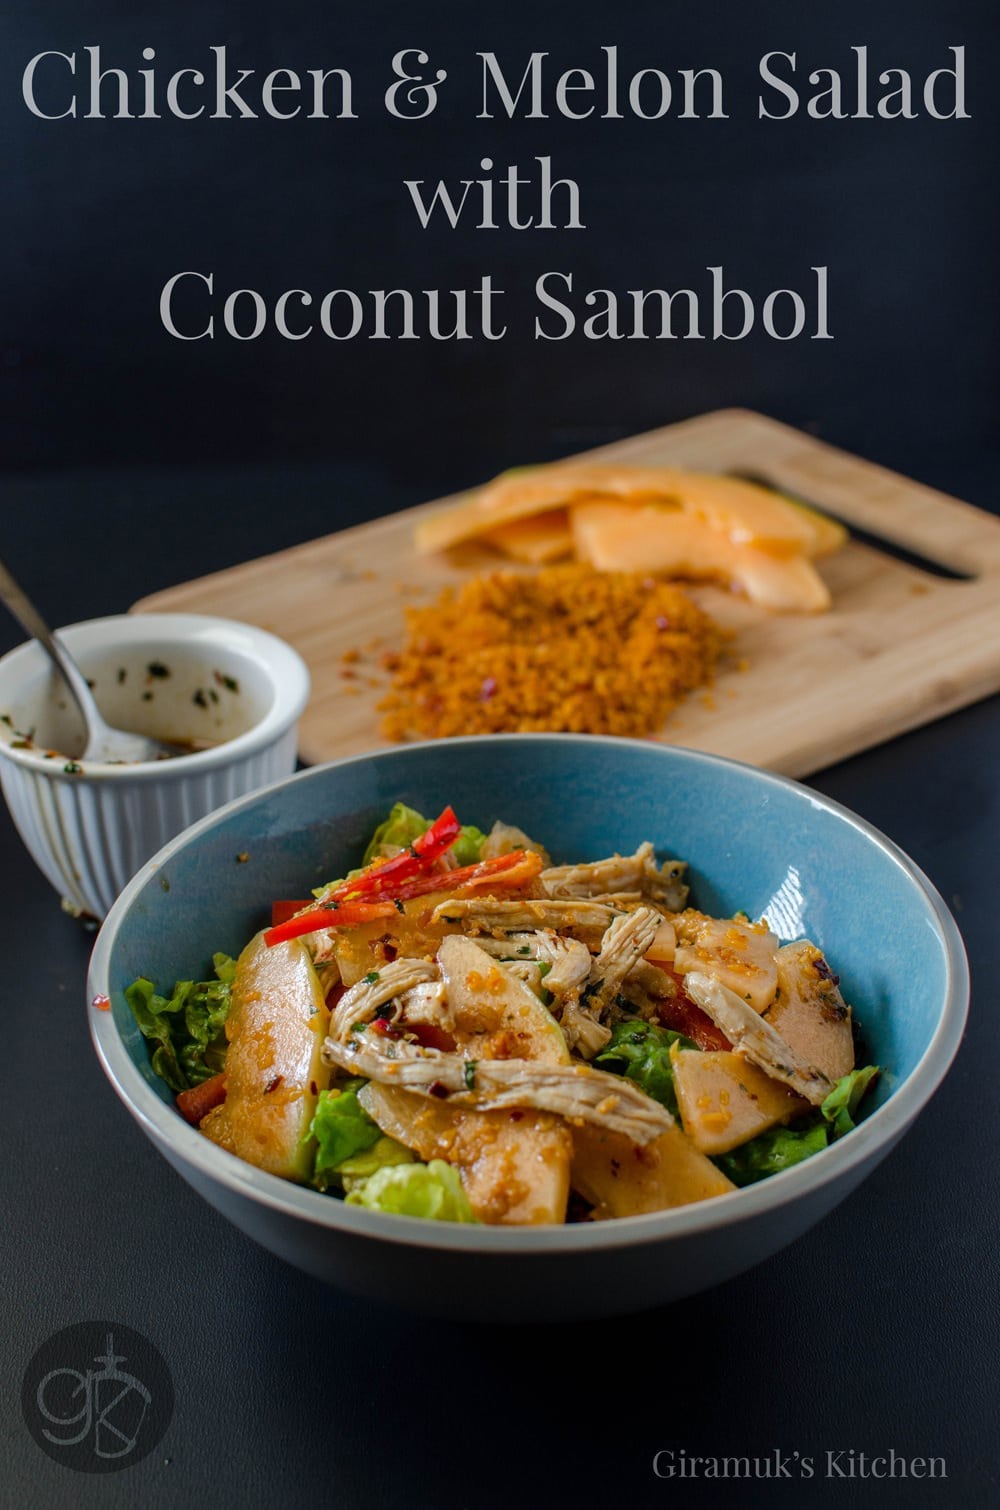  Chicken and Melon Salad with Coconut Sambol - A delicious and fresh Chicken and Melon Salad with a tangy and spicy tamarind dressing and a spicy coconut sambol topping 